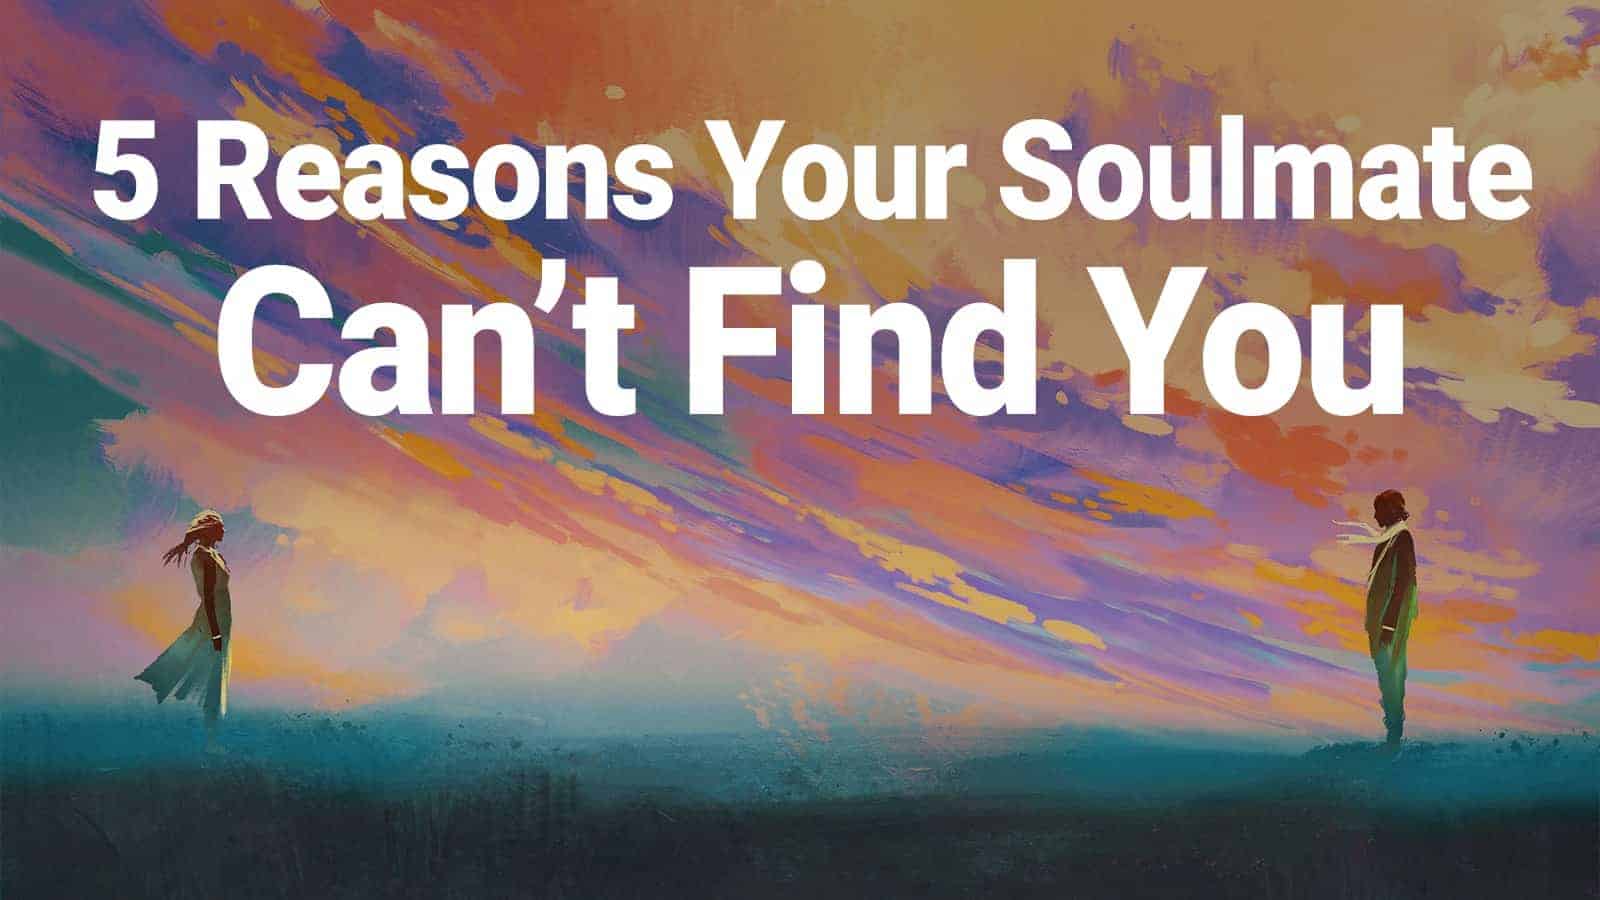 Beroep ijzer Natte sneeuw 5 Reasons Your Soulmate Can't Find You